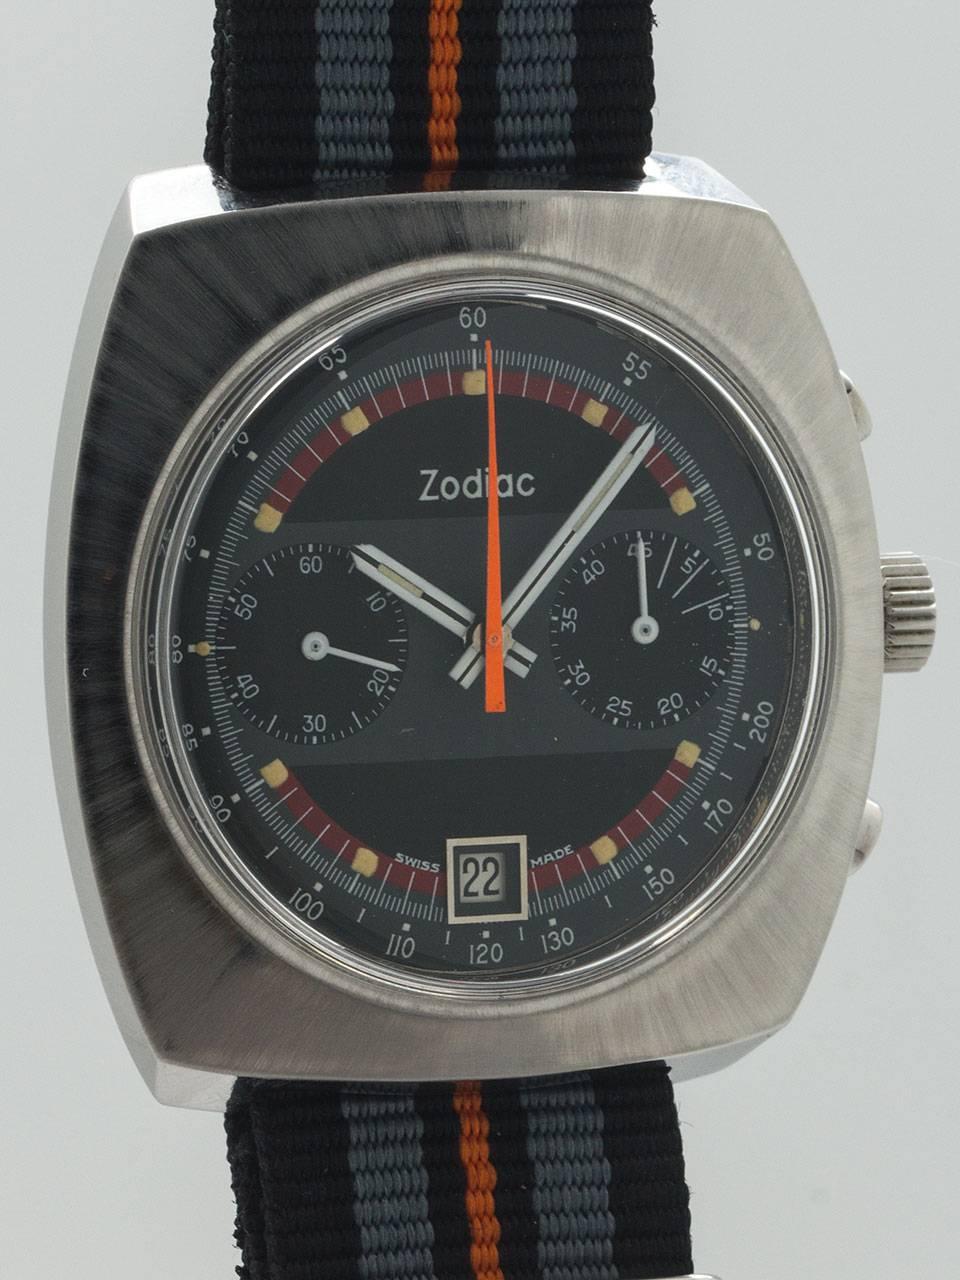 Zodiac Stainless Steel Chronograph Wristwatch circa 1970s. Robust 40 x 44mm cushion shaped stainless steel ref no. 842.888 signed Zodiac case. With beautiful condition original gray, black, and orange detail dial with applied silver indexes and